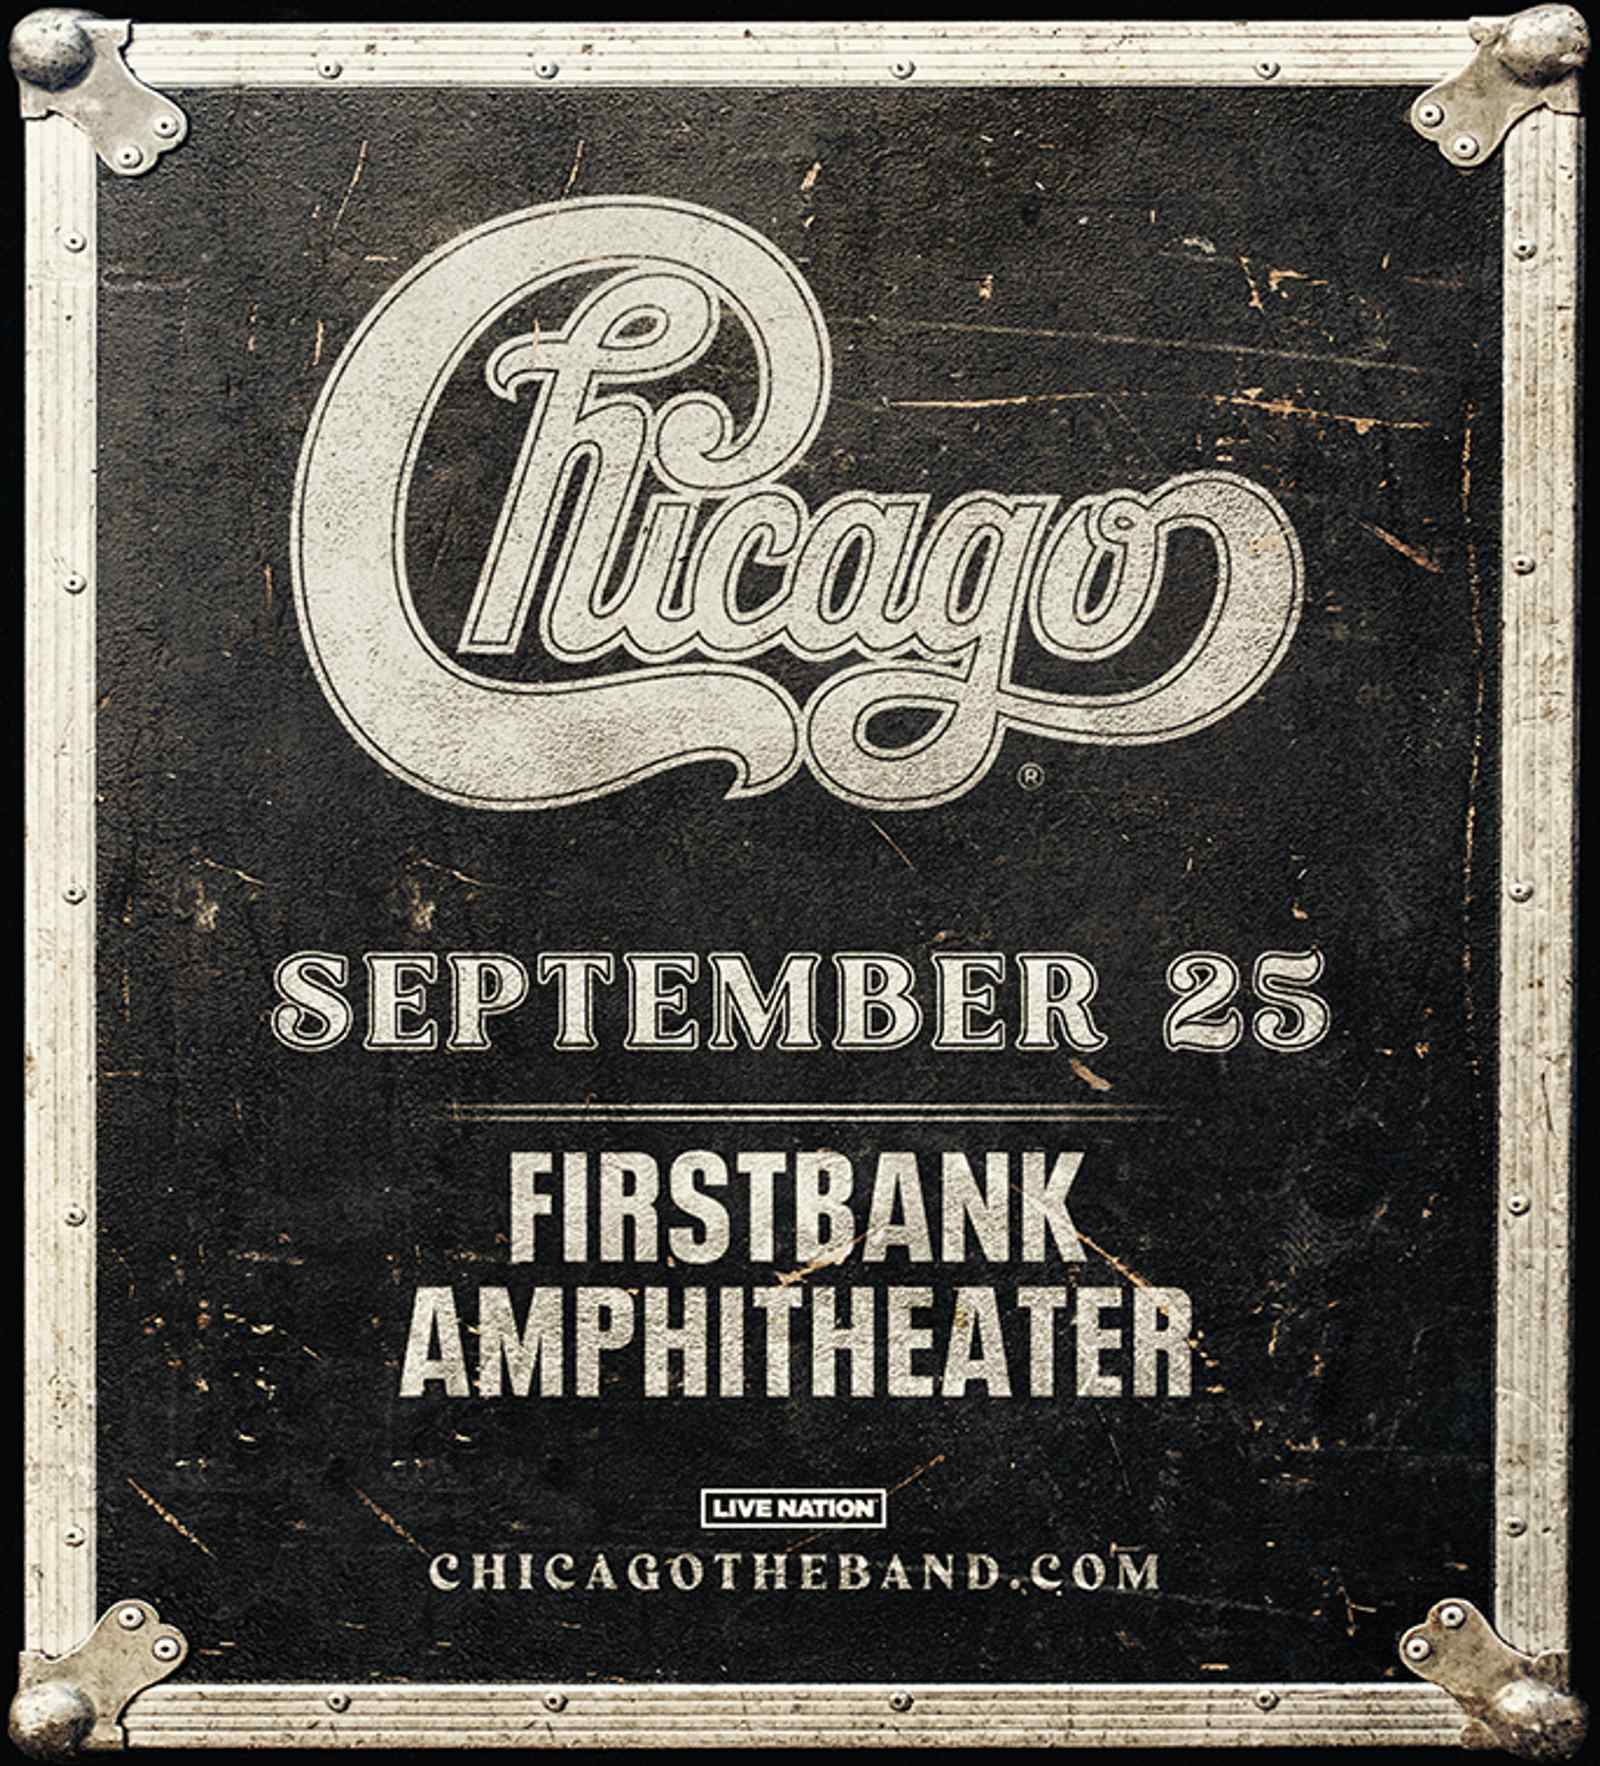 Chicago in Franklin, TN at FirstBank Amphitheater.